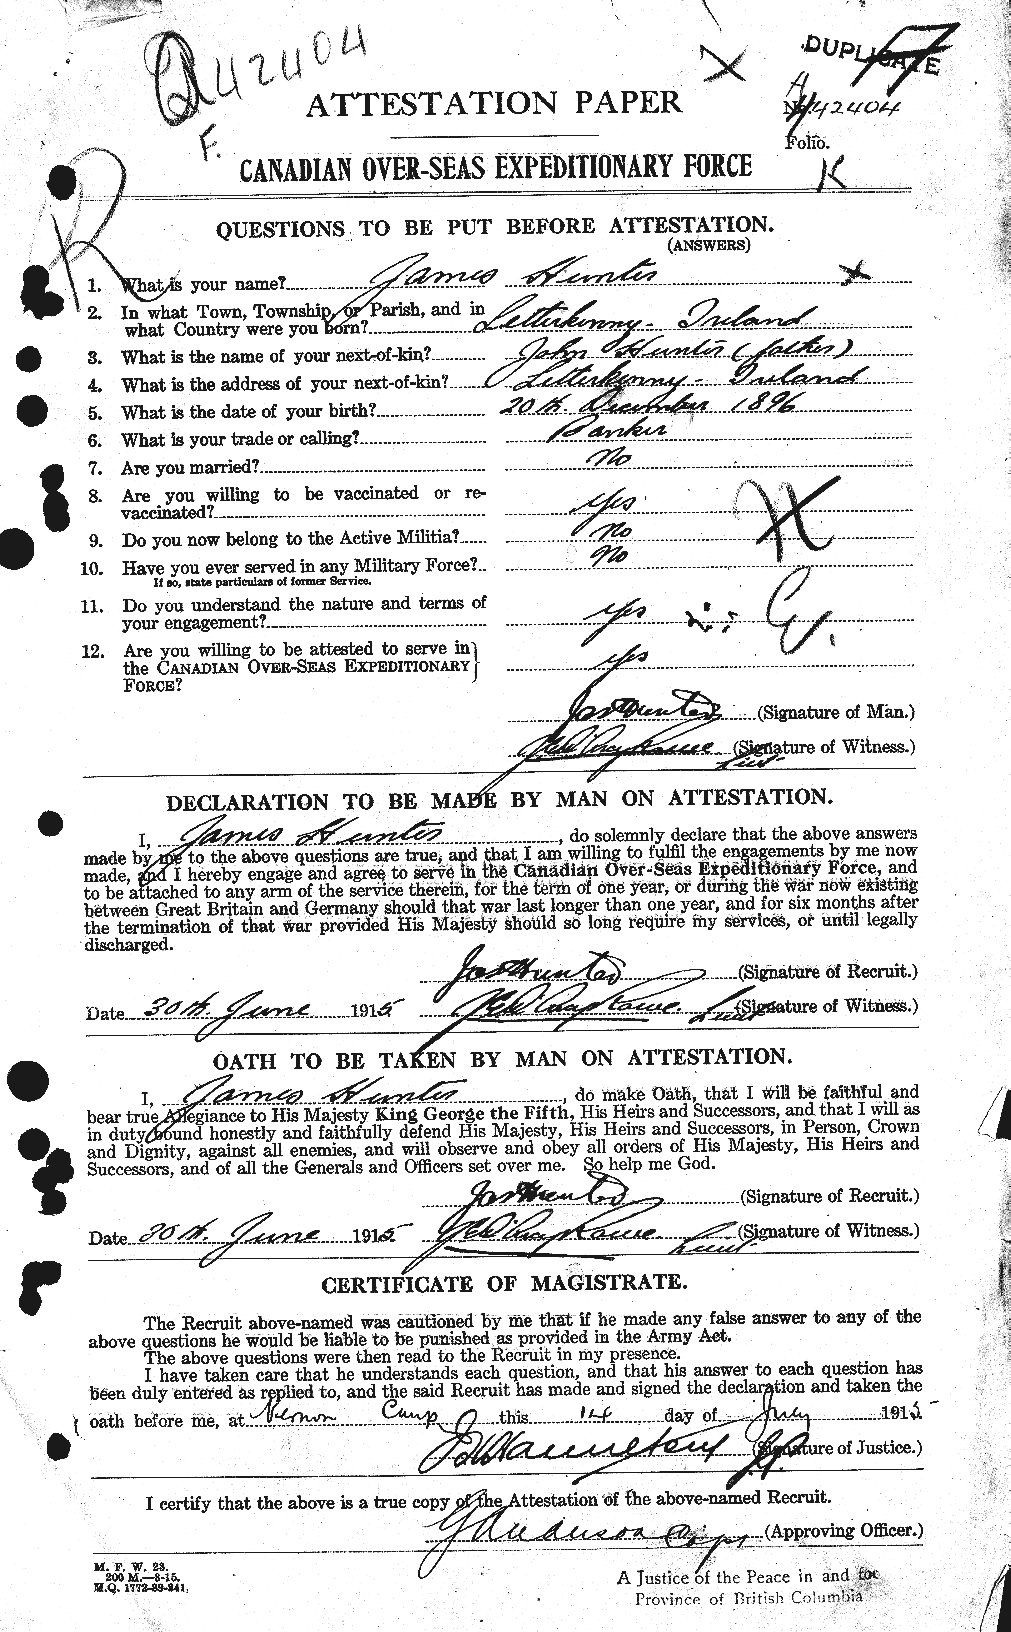 Personnel Records of the First World War - CEF 410280a